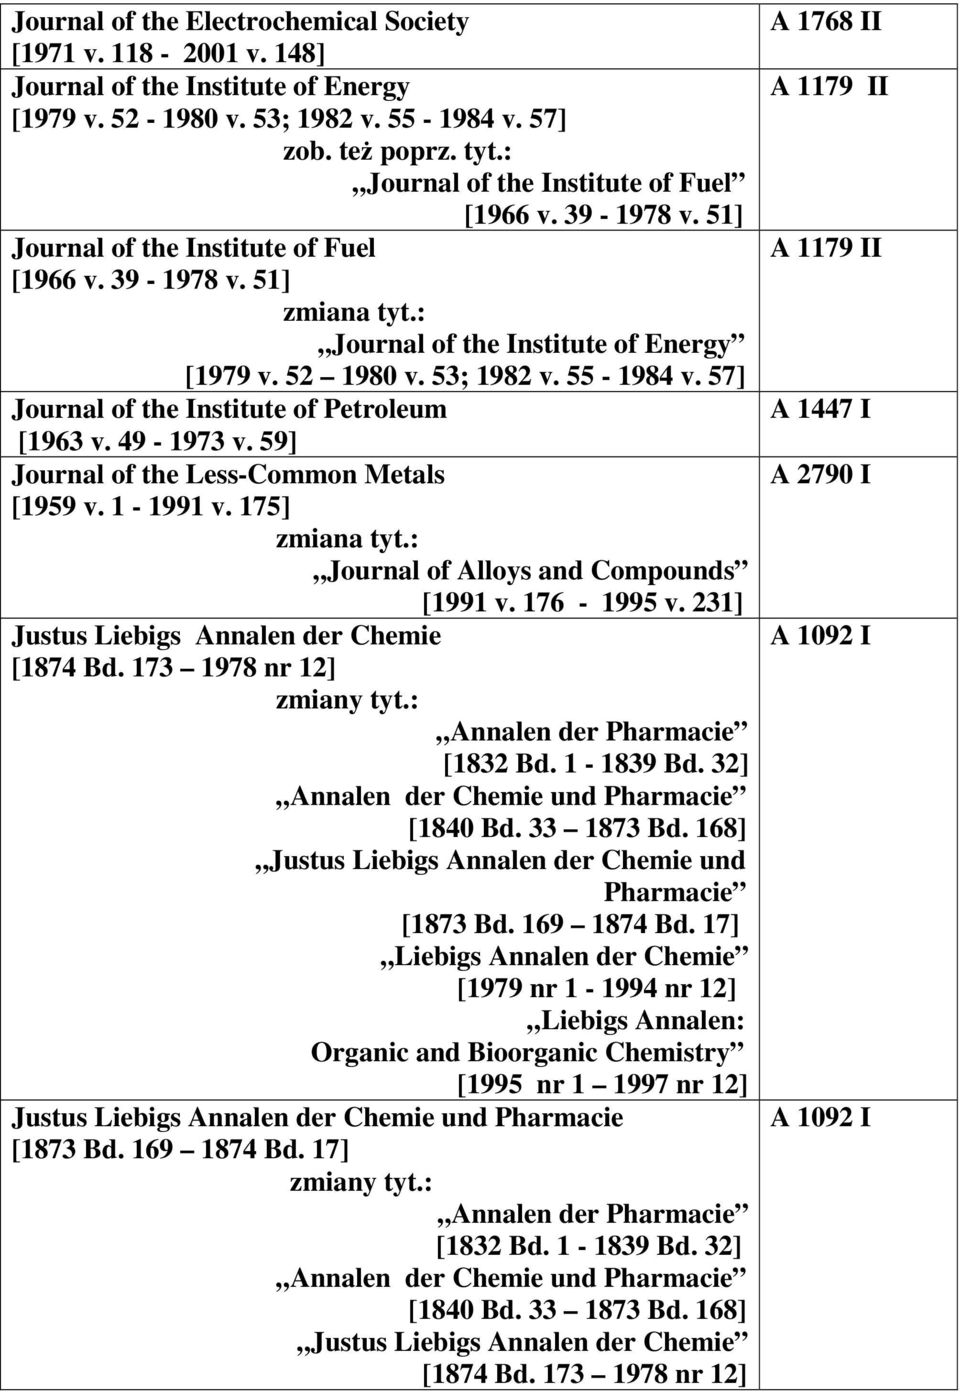 59] Journal of the Less-Common Metals [1959 v. 1-1991 v. 175] Journal of Alloys and Compounds [1991 v. 176-1995 v. 231] Justus Liebigs Annalen der Chemie [1874 Bd.